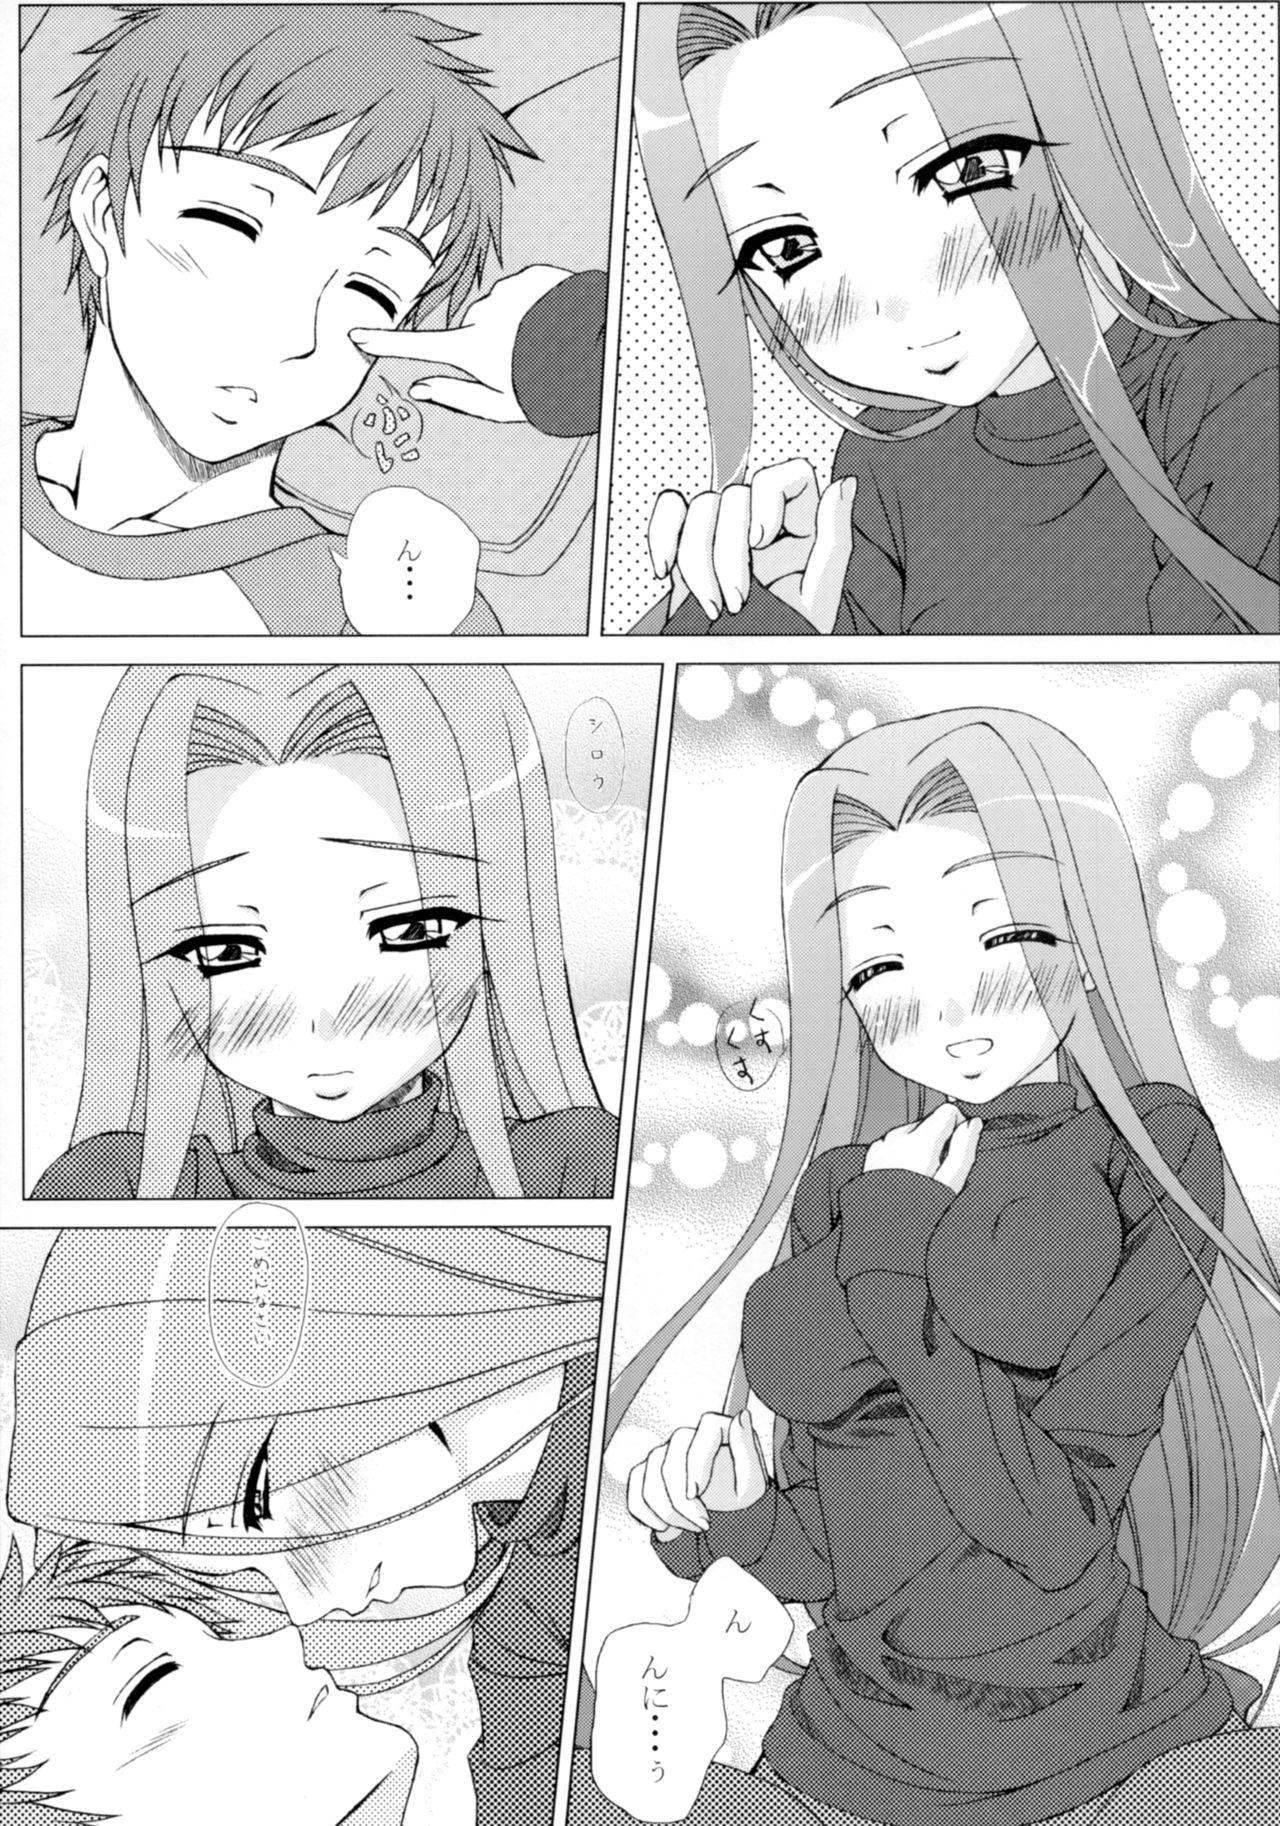 Missionary CUTE - Fate stay night Boy Girl - Page 4